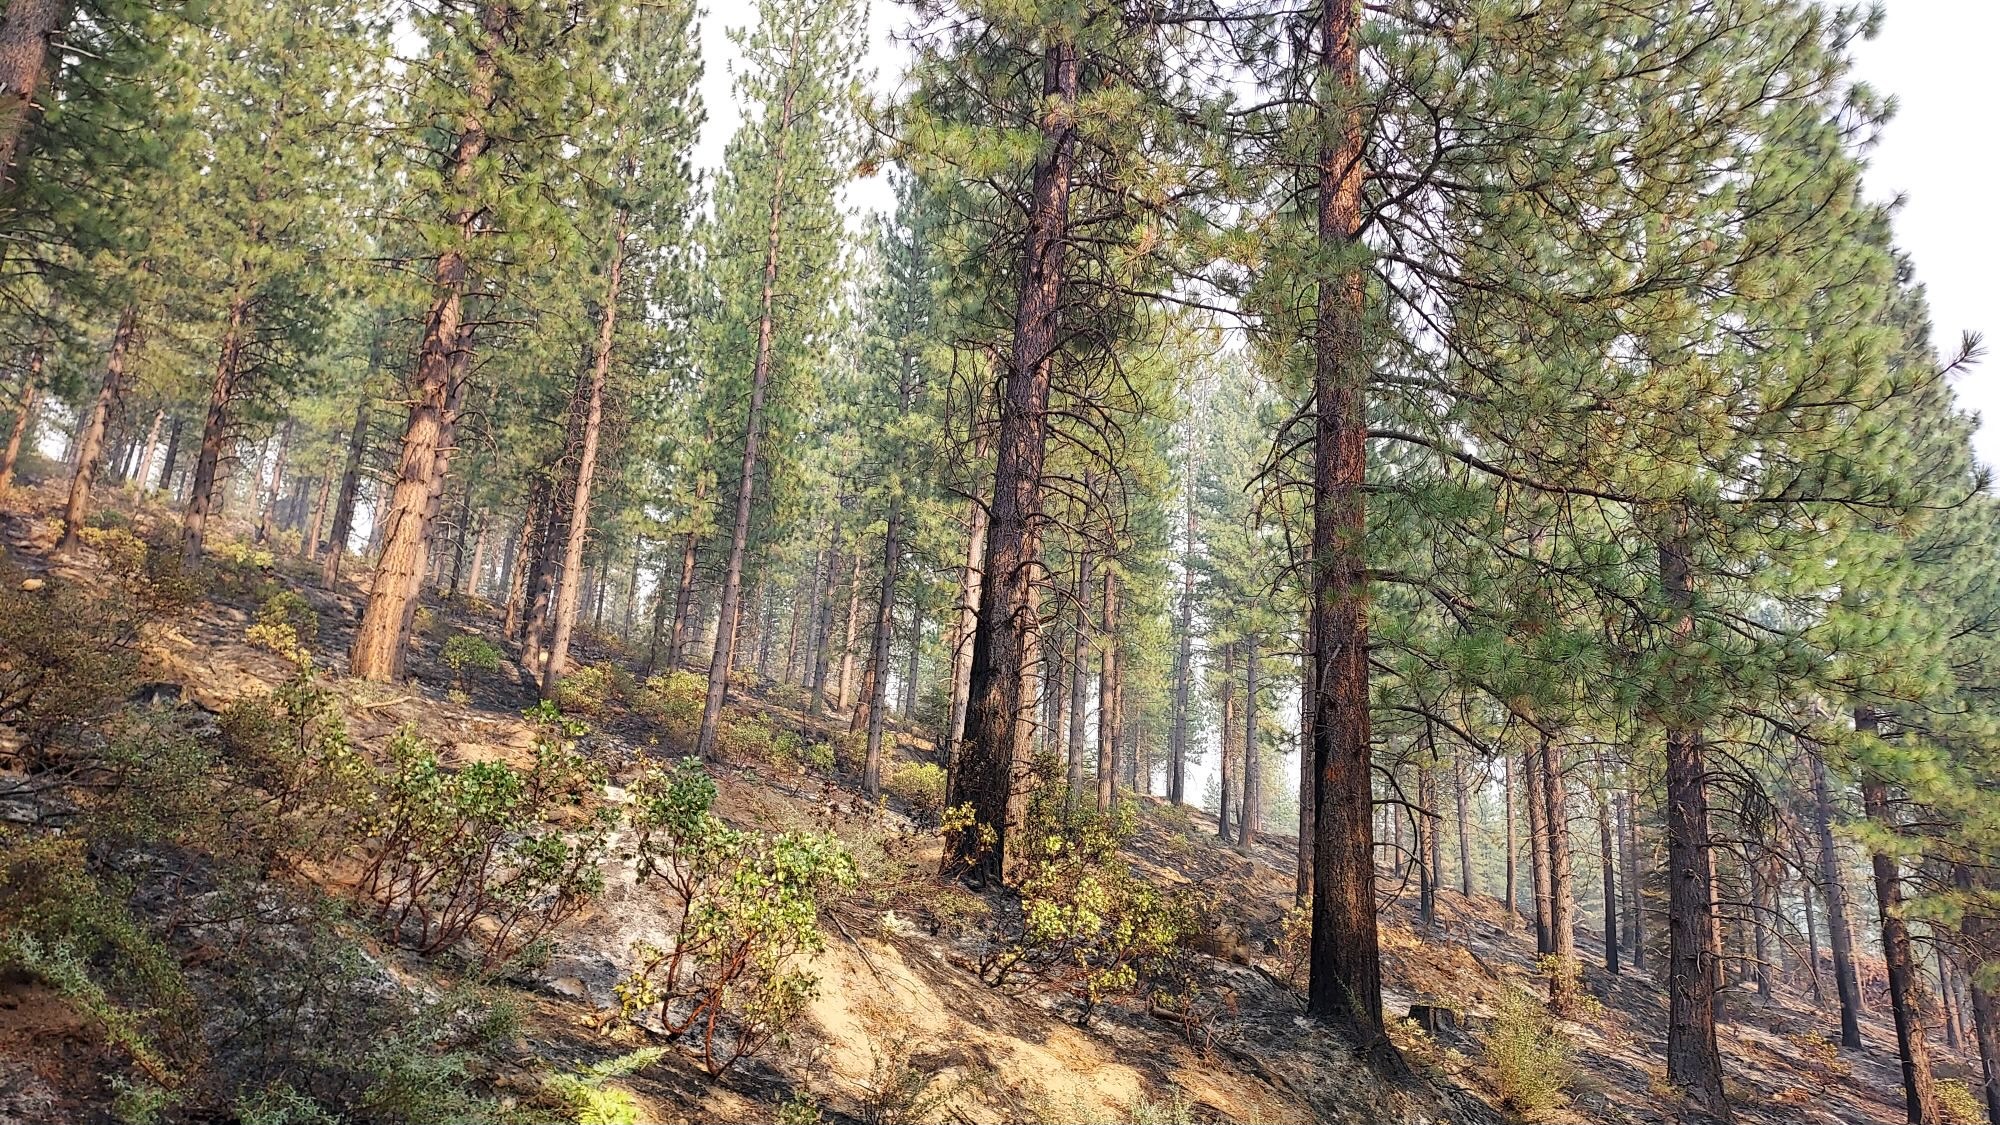 Some sections of forest scorched by the Caldor Fire, the 15th largest in California history,&nbsp;are still intact and green as of early September, in part thanks to the work of earlier fuel reduction treatments such as prescribed burning.